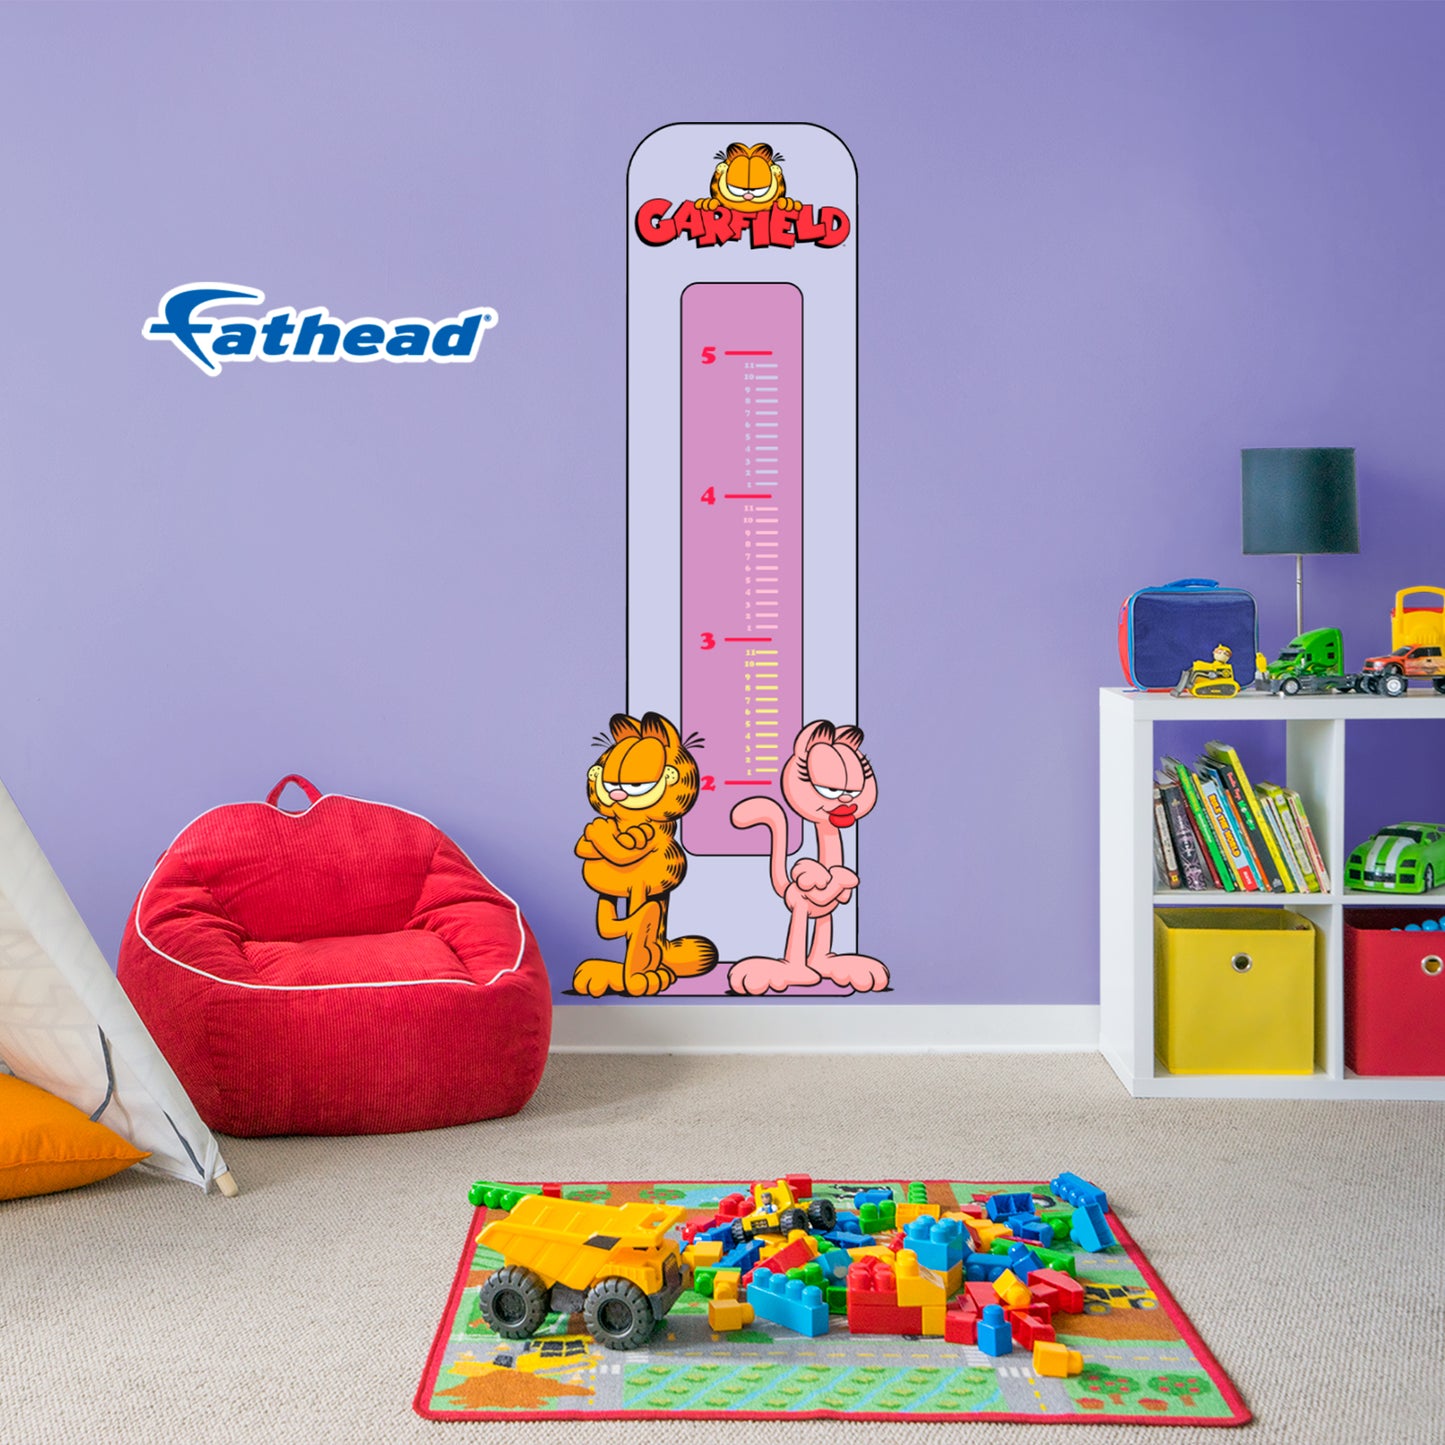 Garfield: Garfield & Arlene Growth Chart        - Officially Licensed Nickelodeon Removable     Adhesive Decal